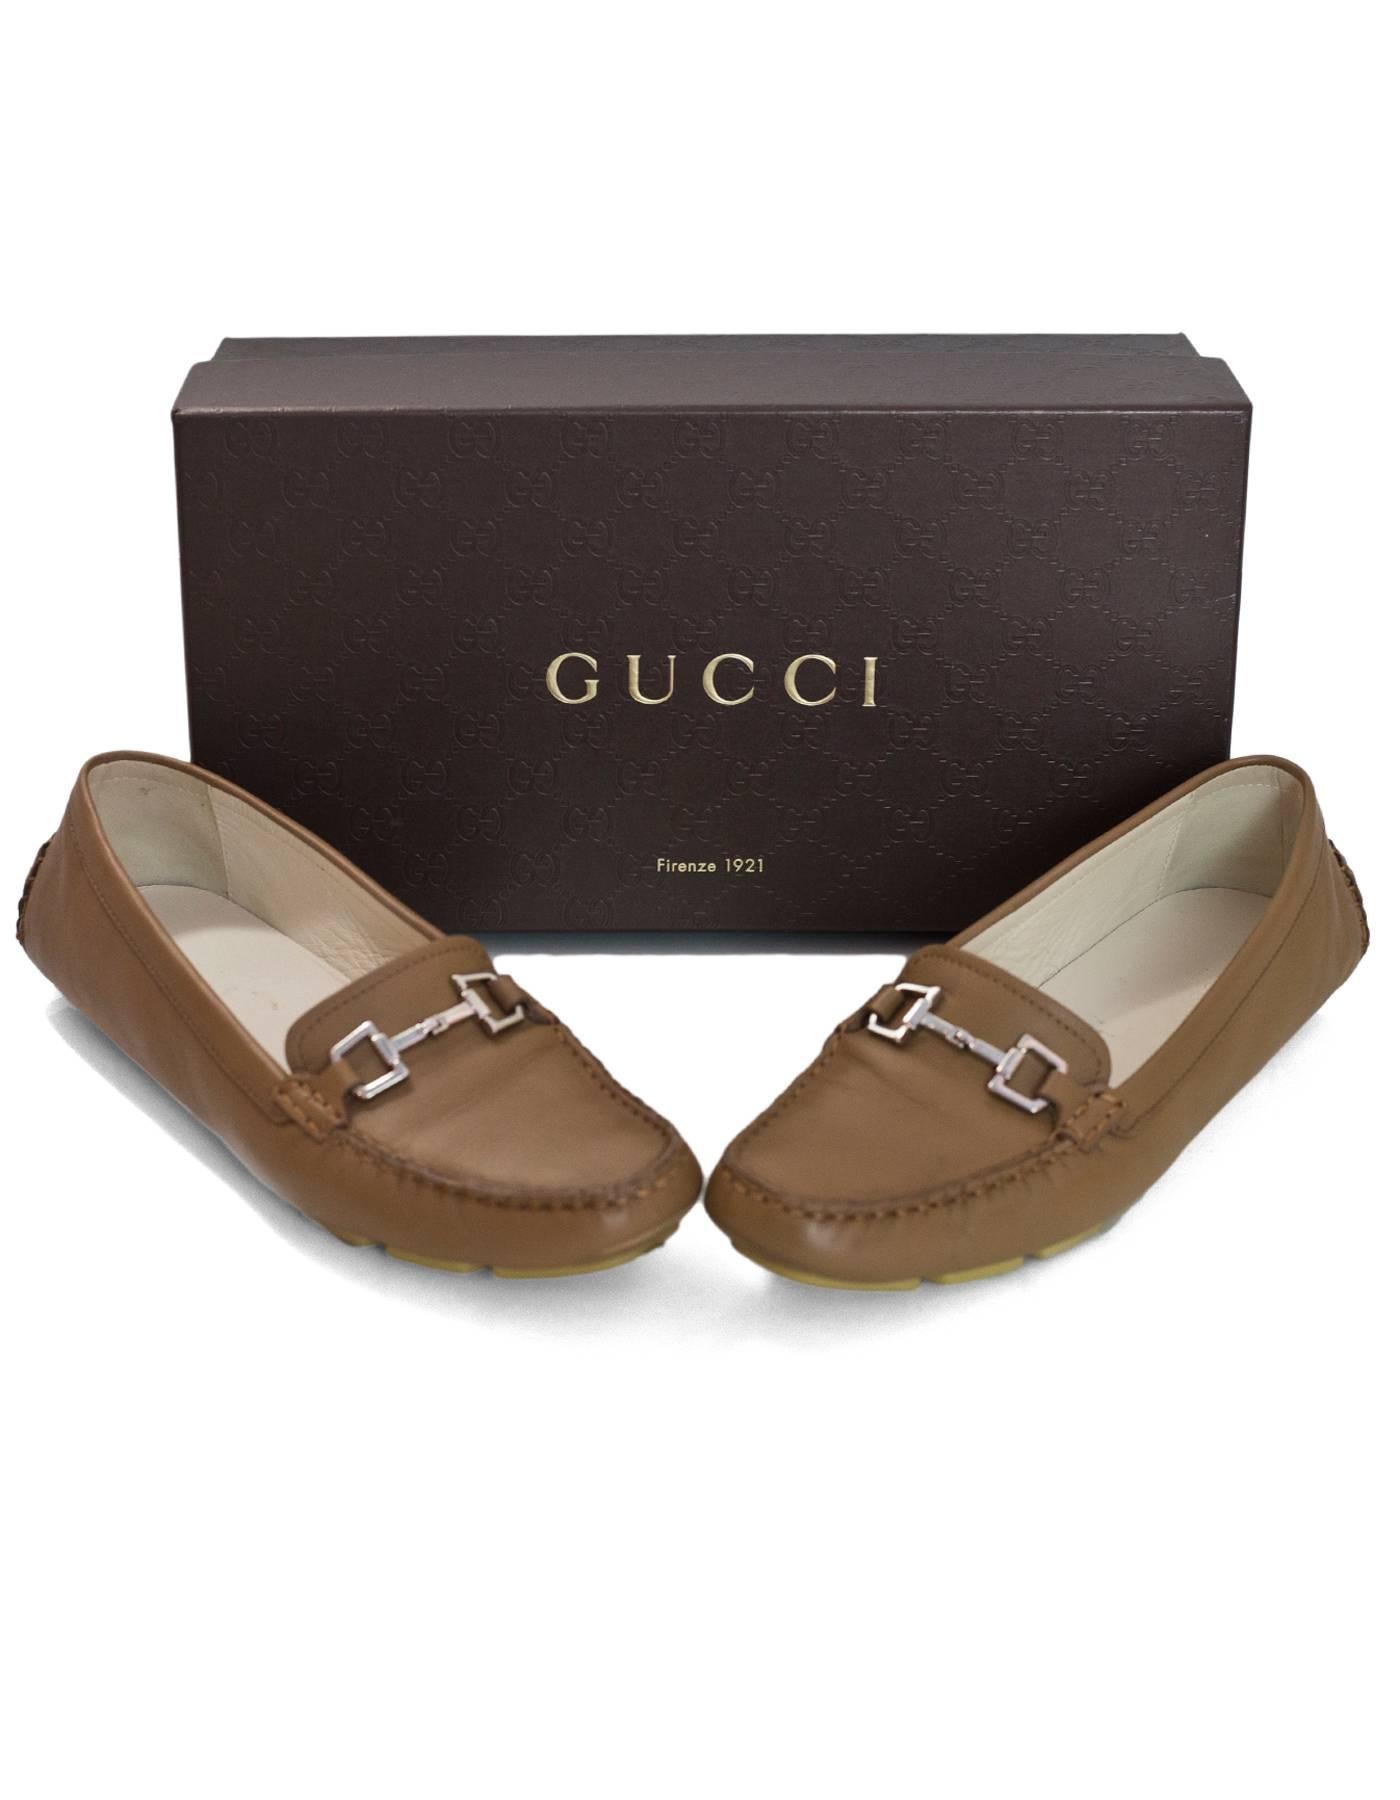 Gucci Camel Leather Loafers Sz 38 with Box 1